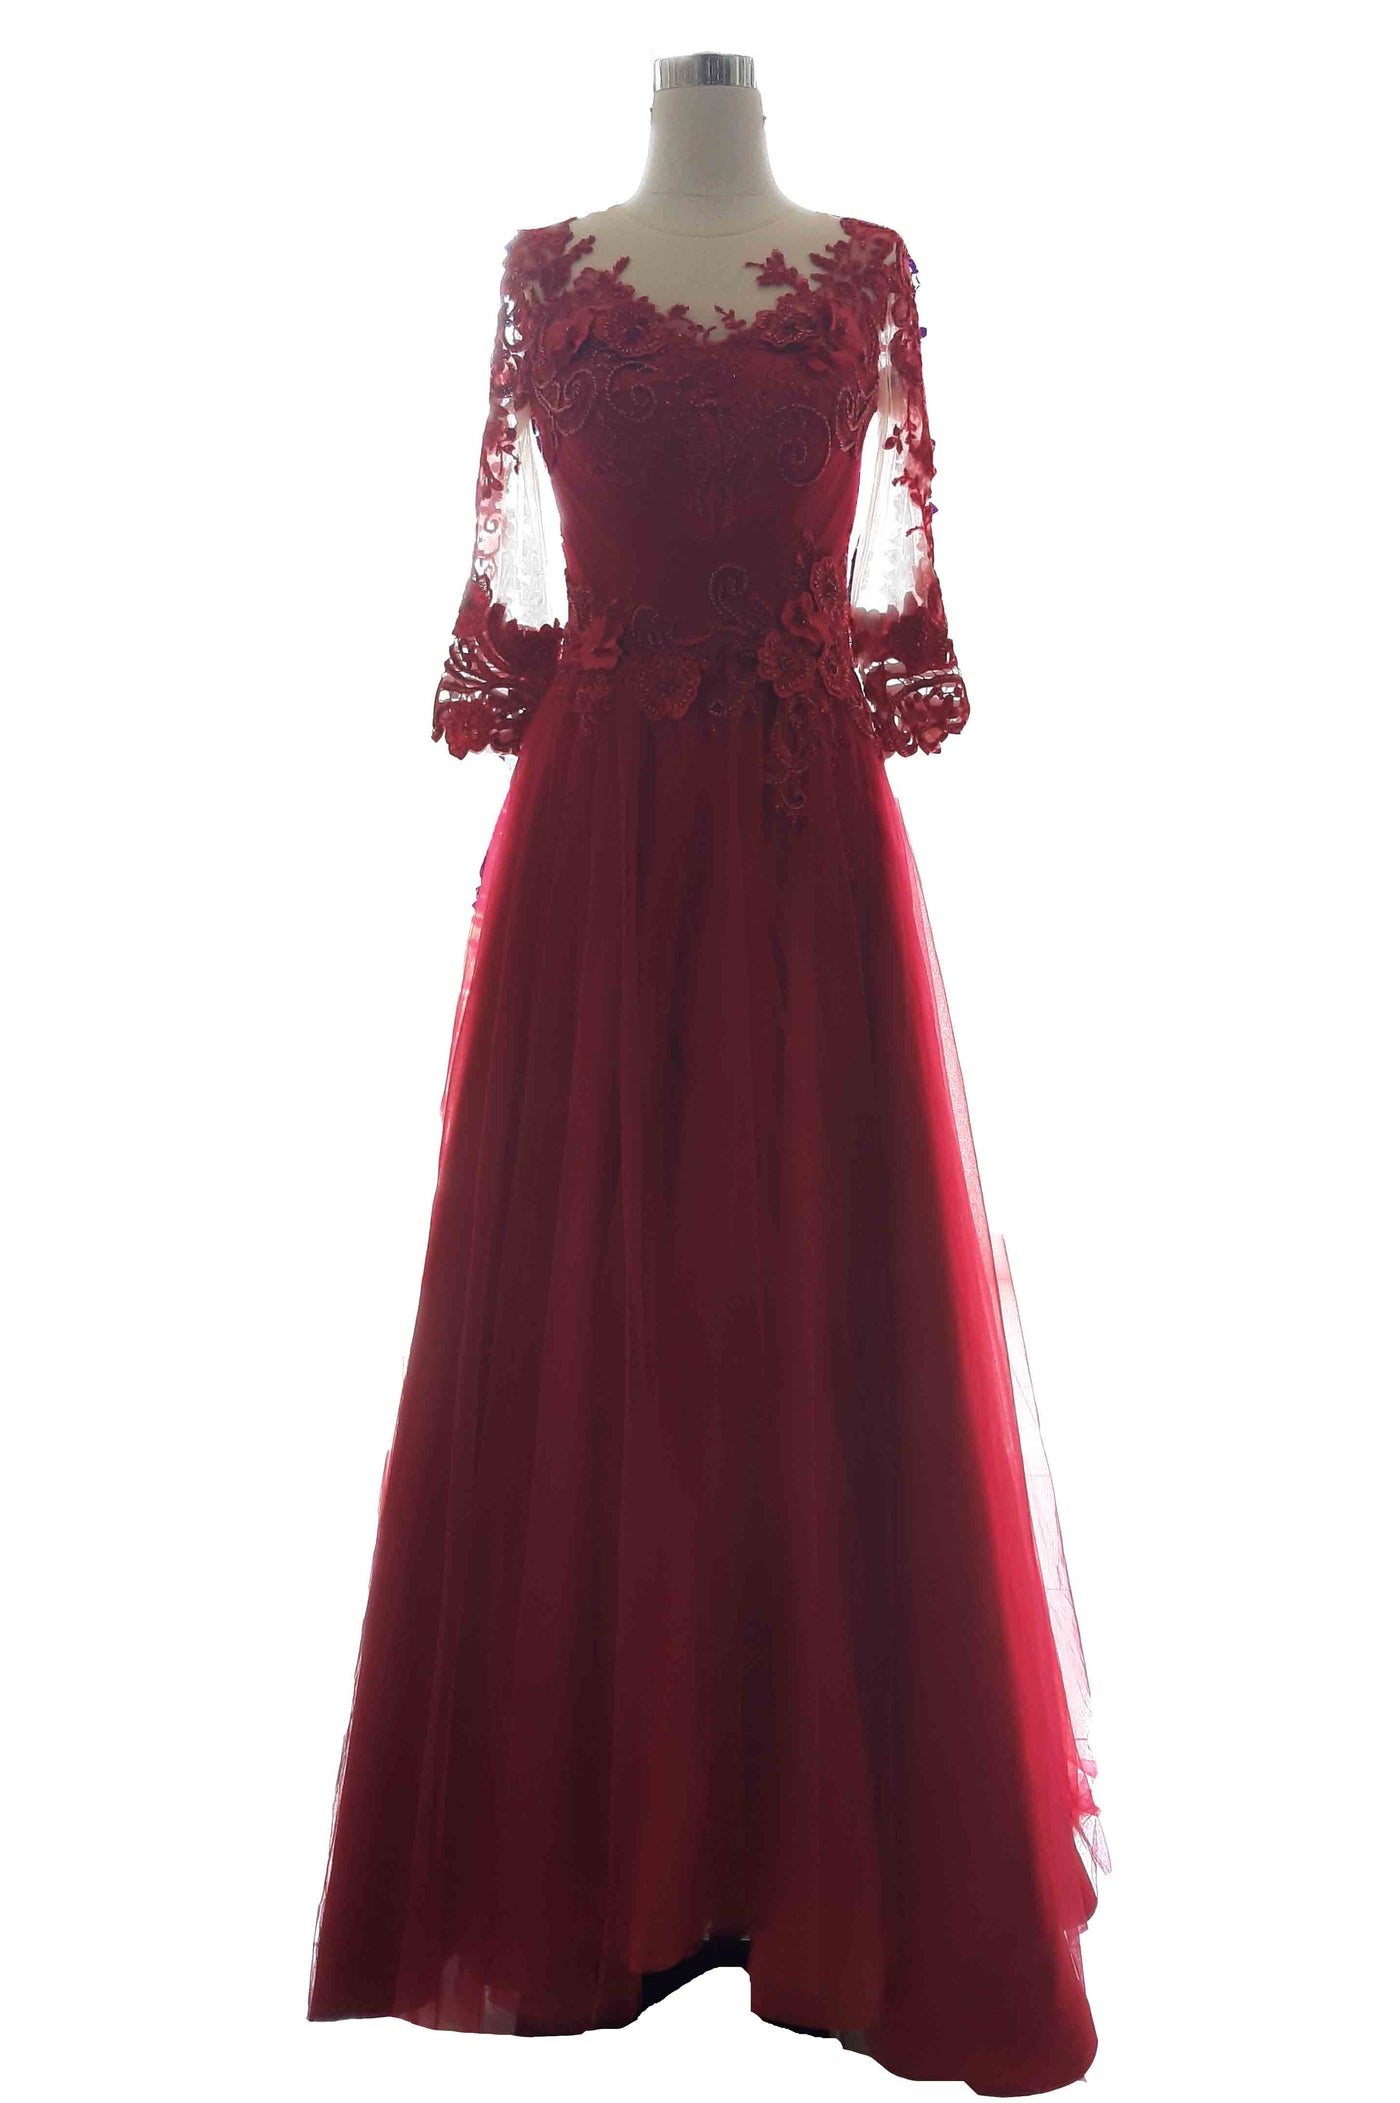 Rent: Private Label - Red 3/4 Lace Sleeves A-Line Gown